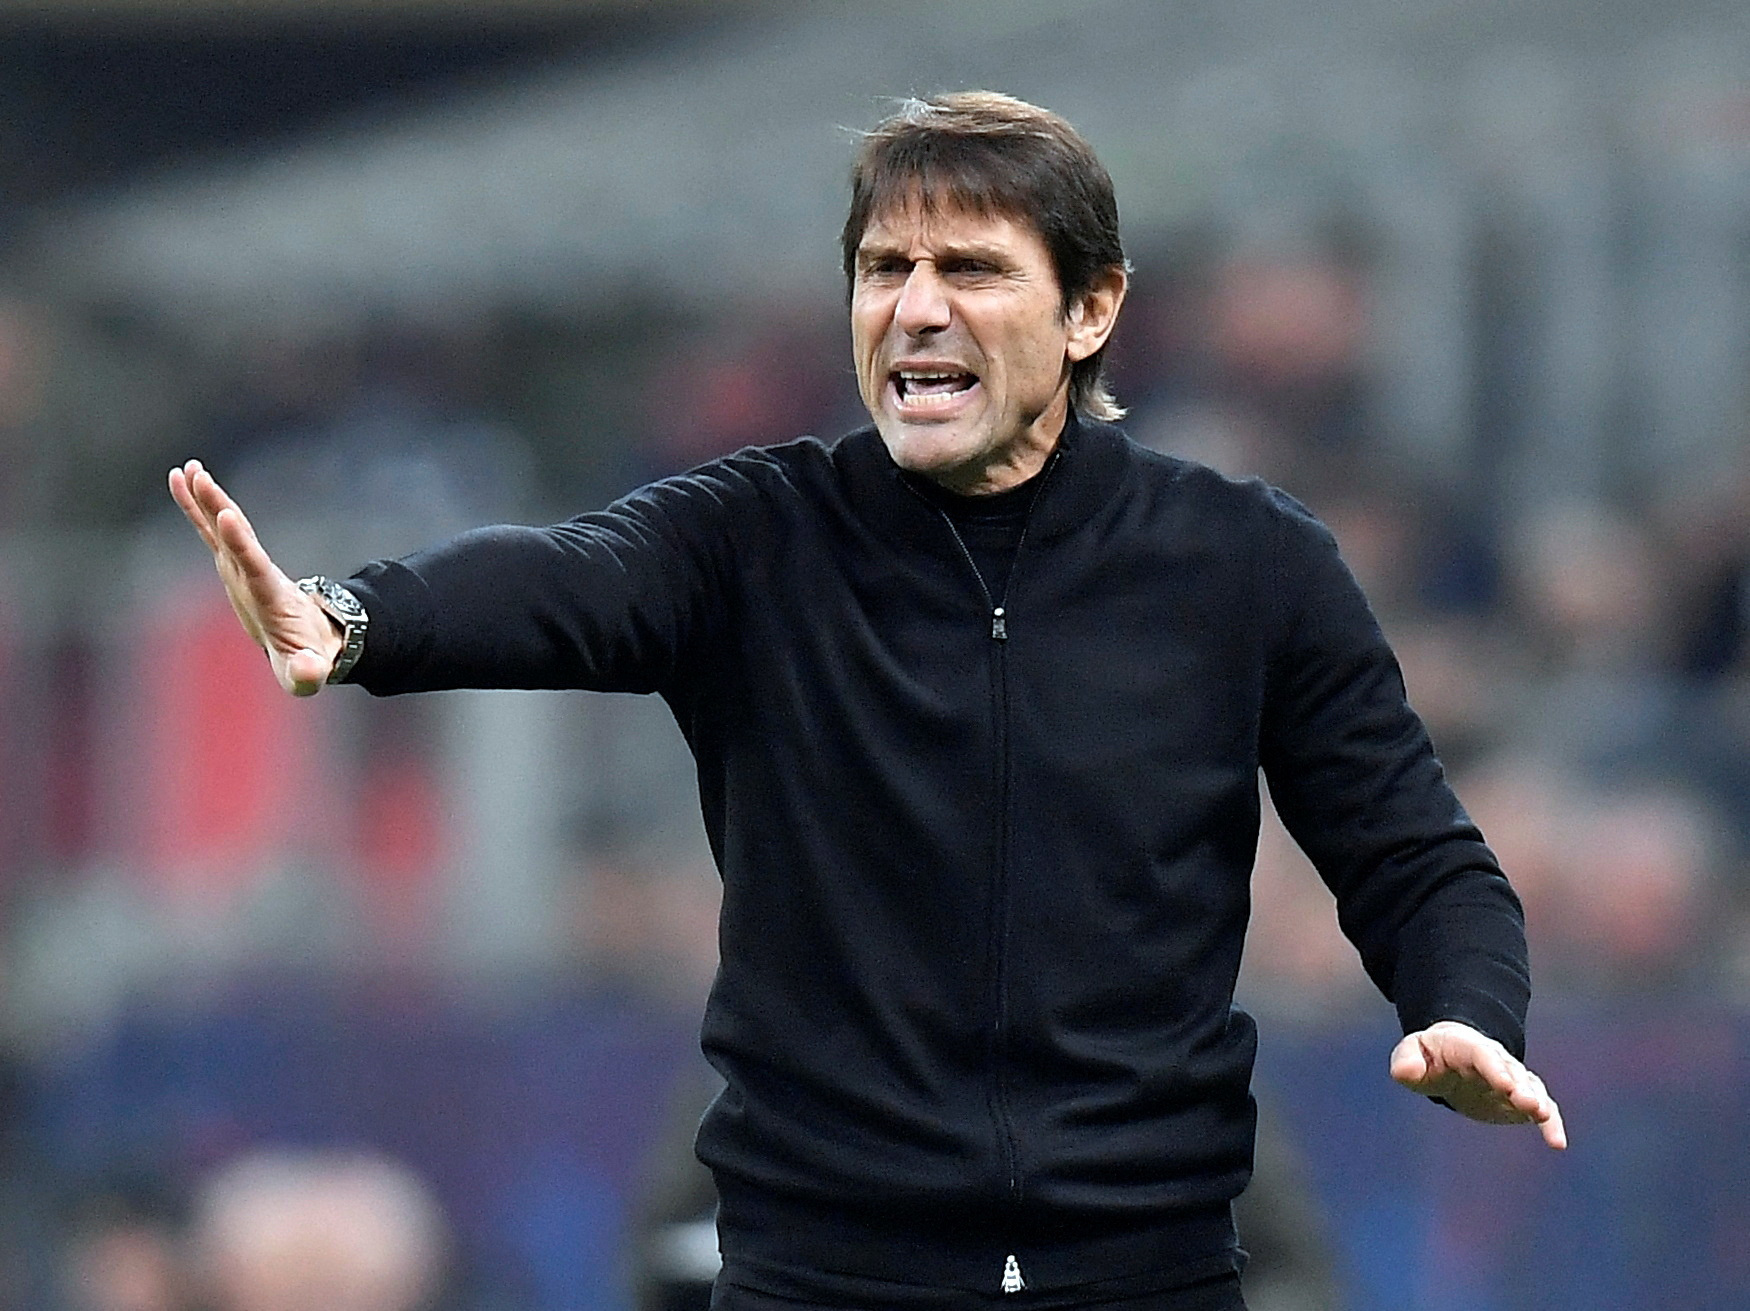 Conte back for Spurs after Wolves game, says Stellini